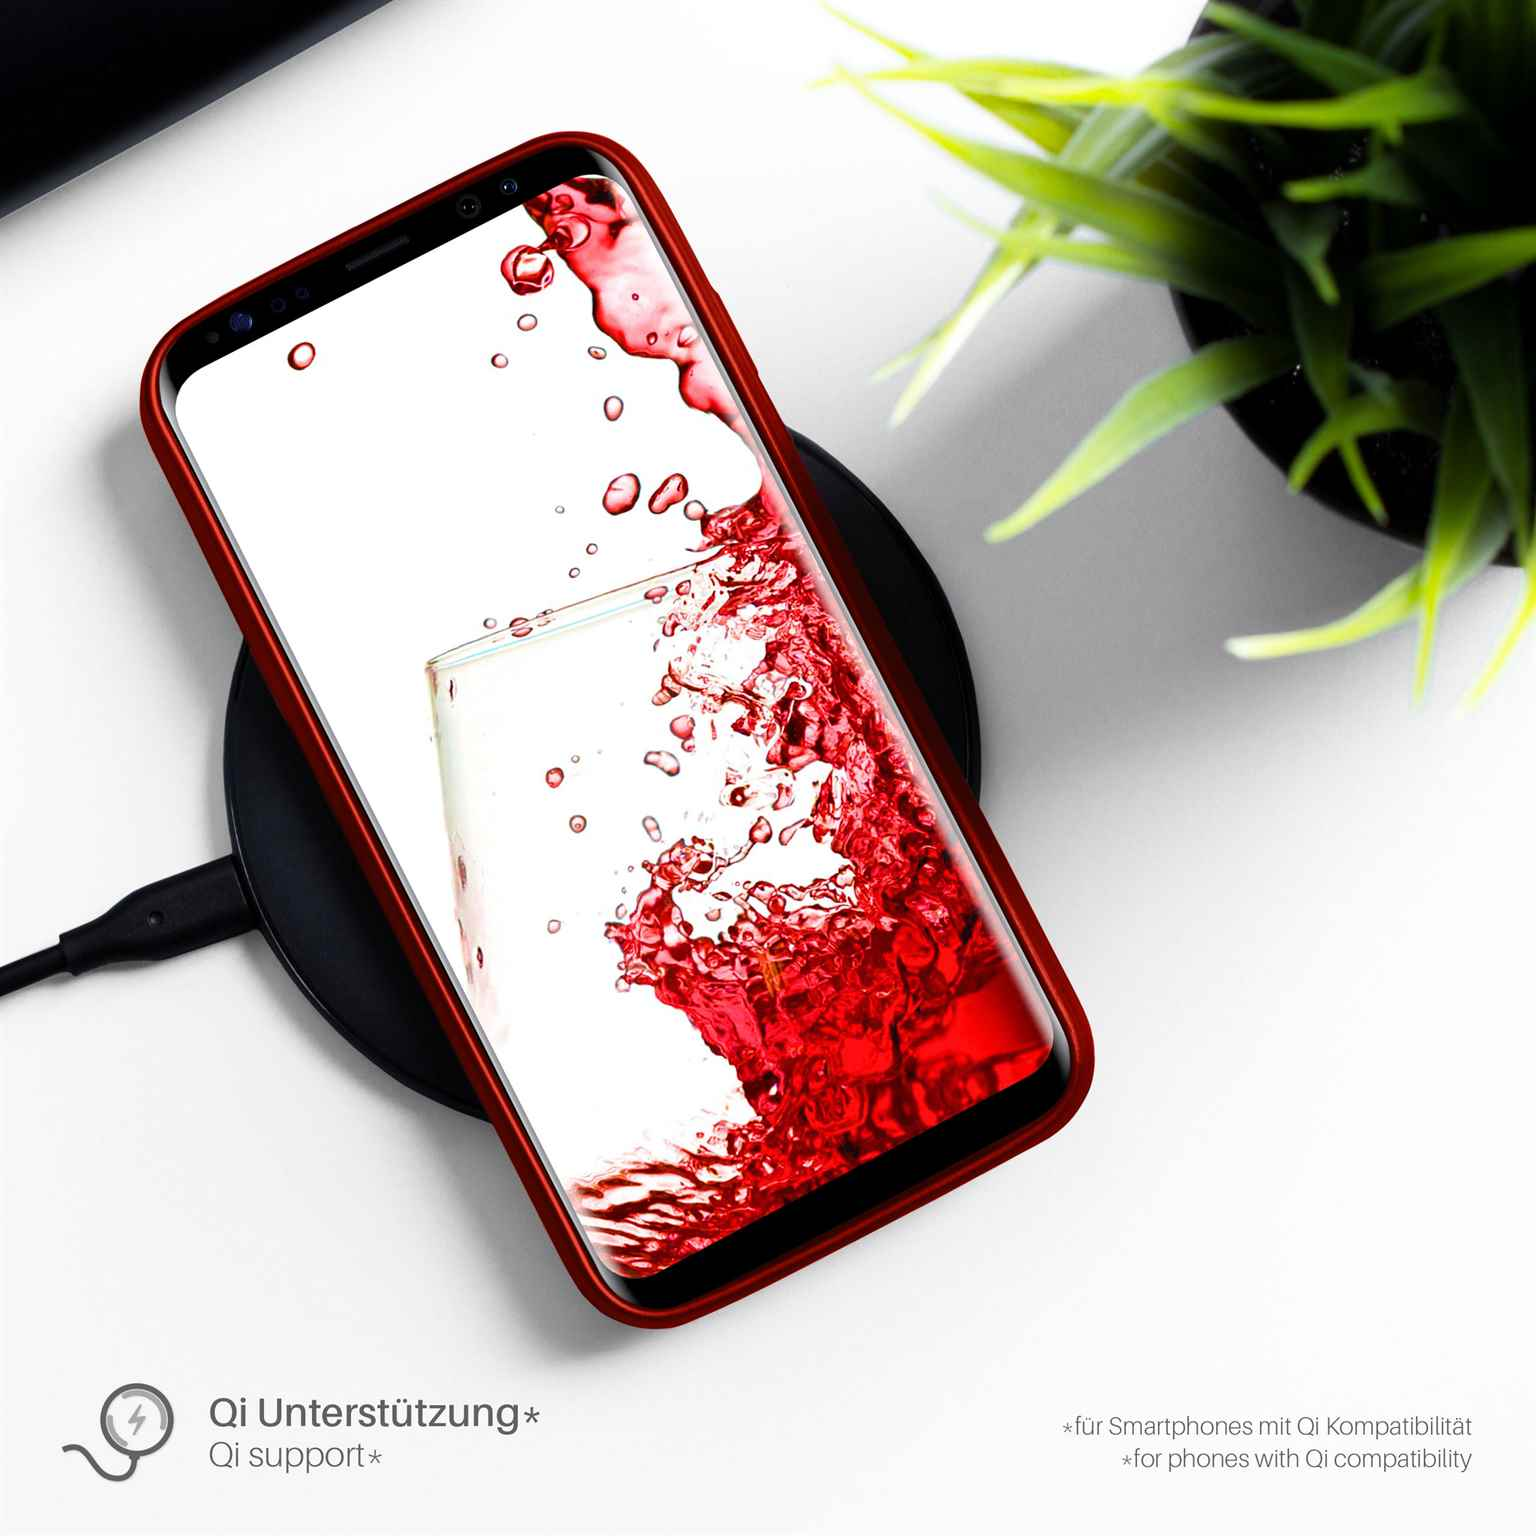 Crimson-Red Samsung, Galaxy Backcover, S7 MOEX Edge, Brushed Case,